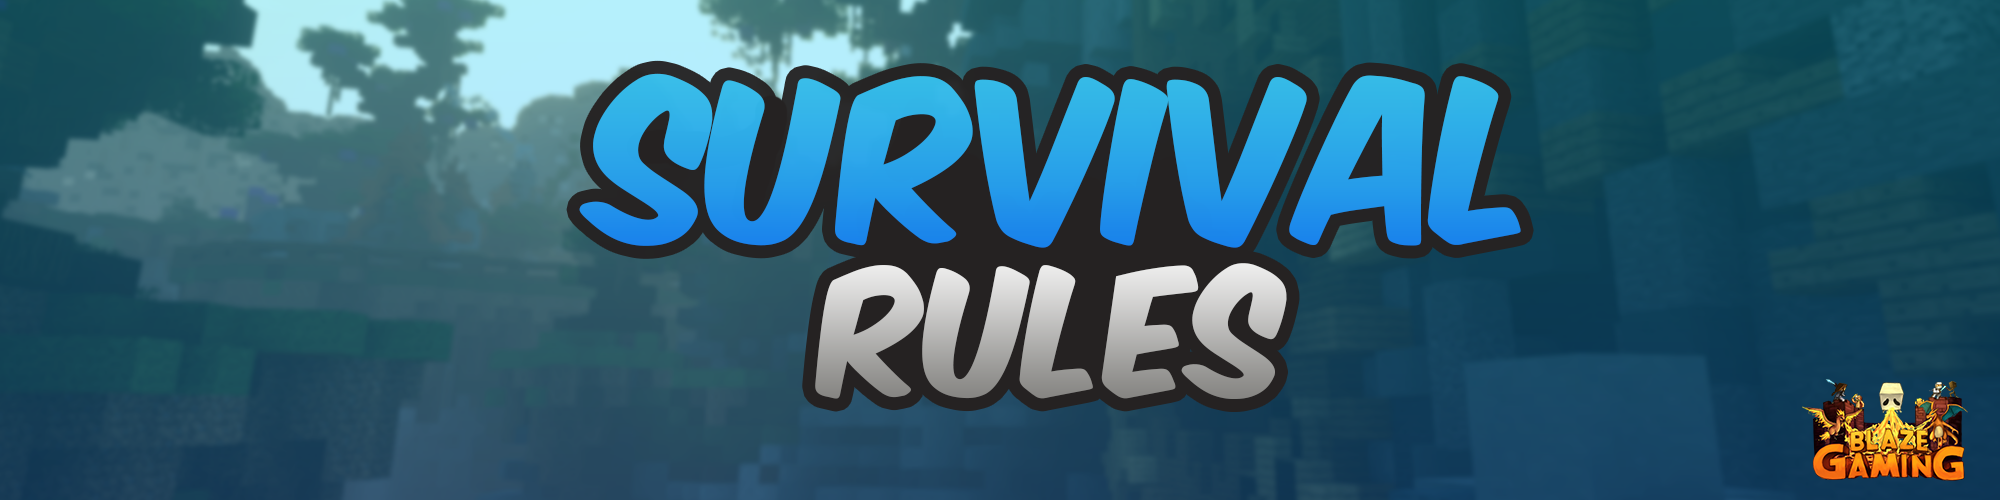 Survival Rules